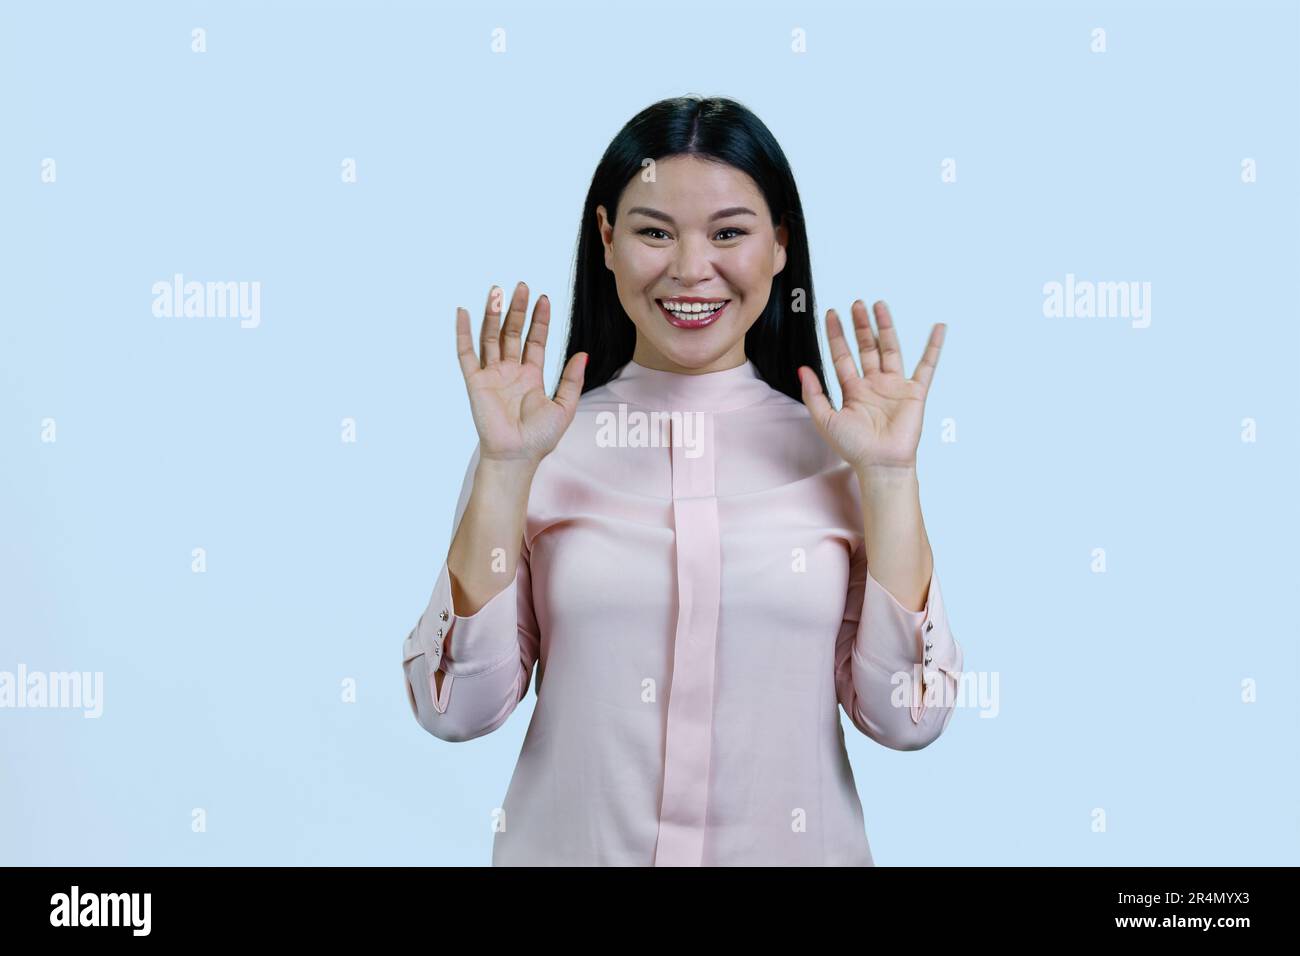 Young asian woman with her hands up shows her palms. Give up gesture. Isolated on pale blue background. Stock Photo